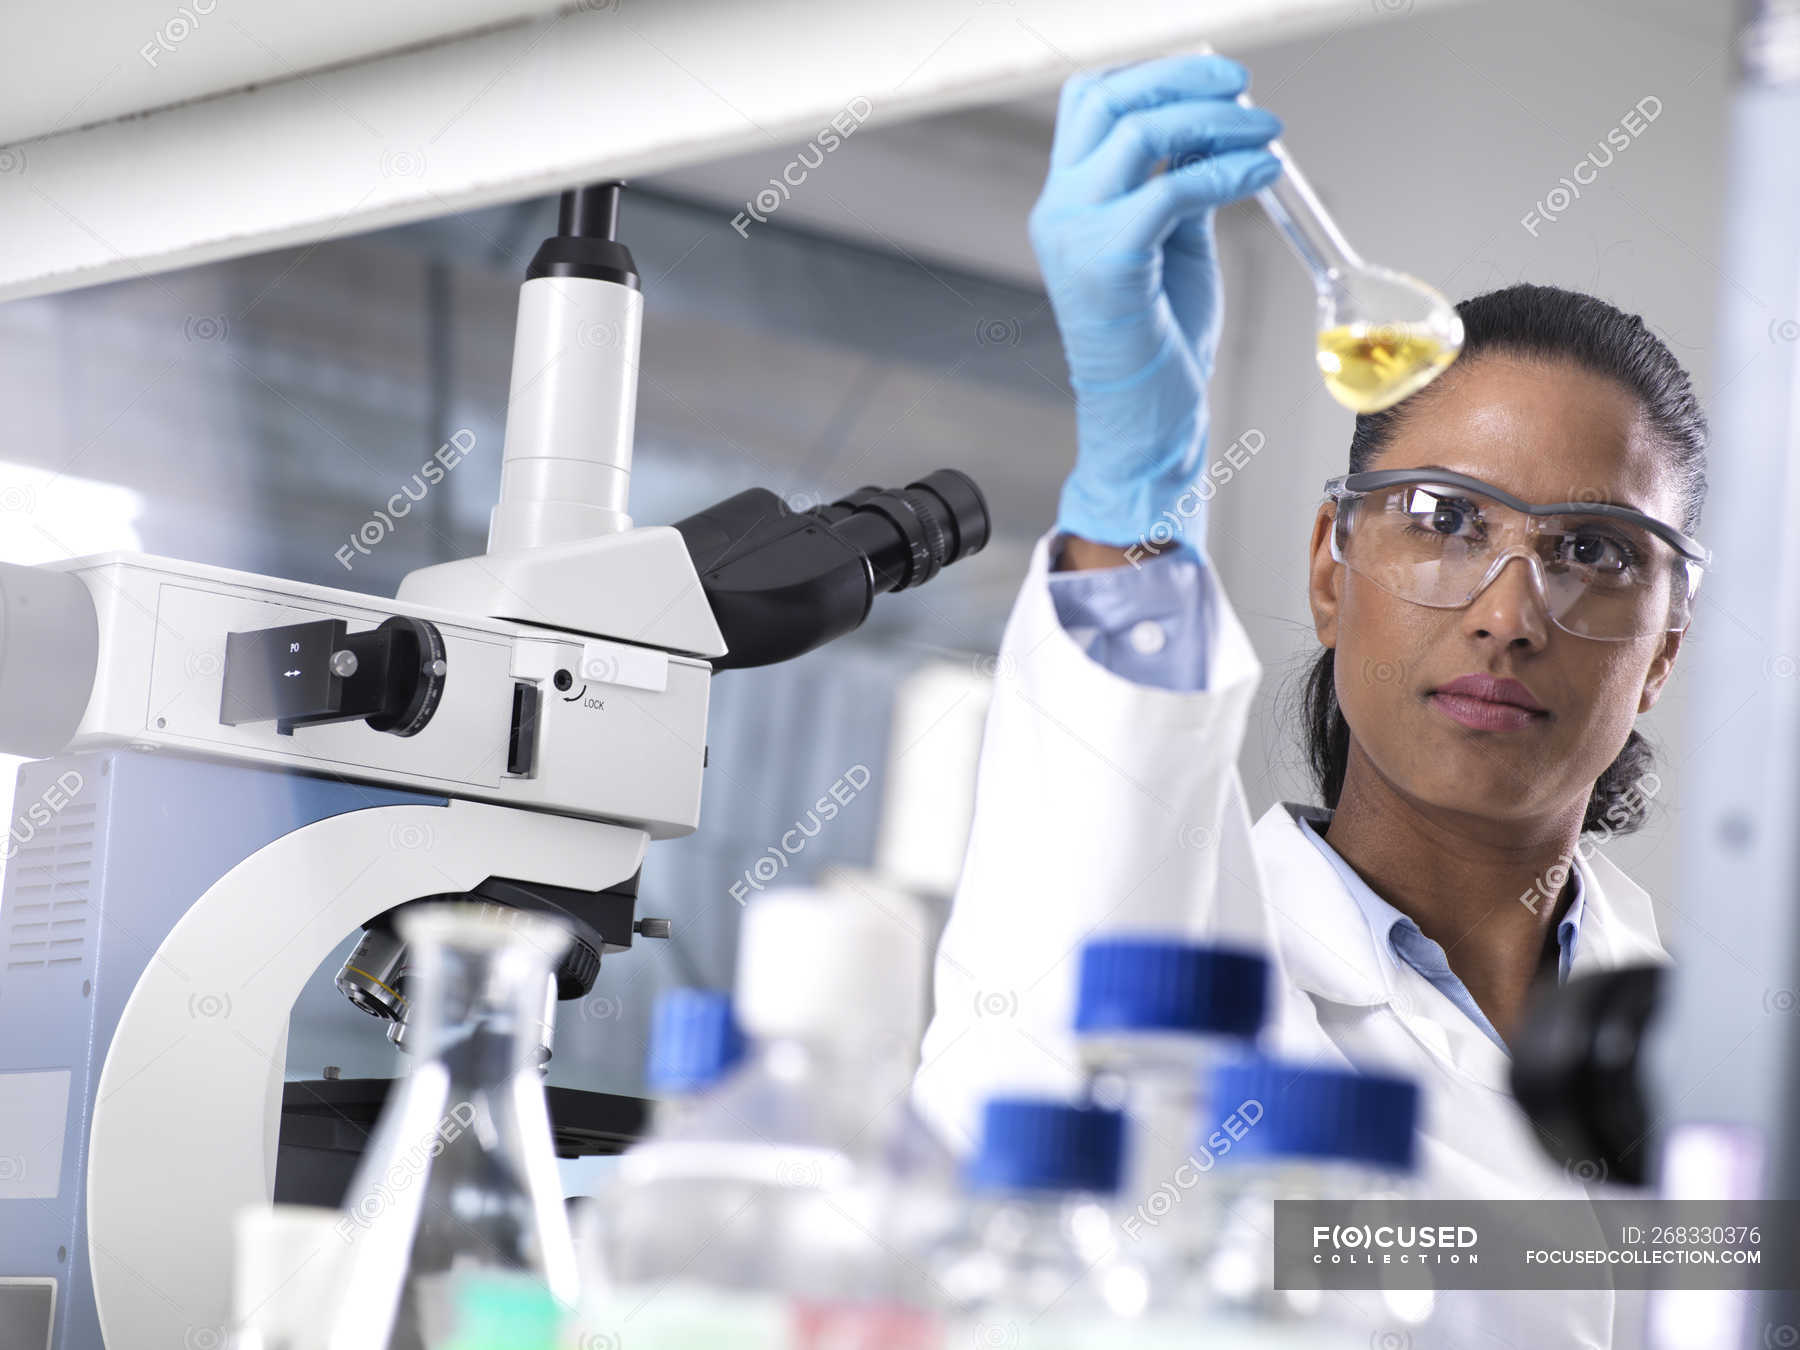 Biotechnology Research, female scientist mixing a chemical — workplace, control - Stock Photo | #268330376